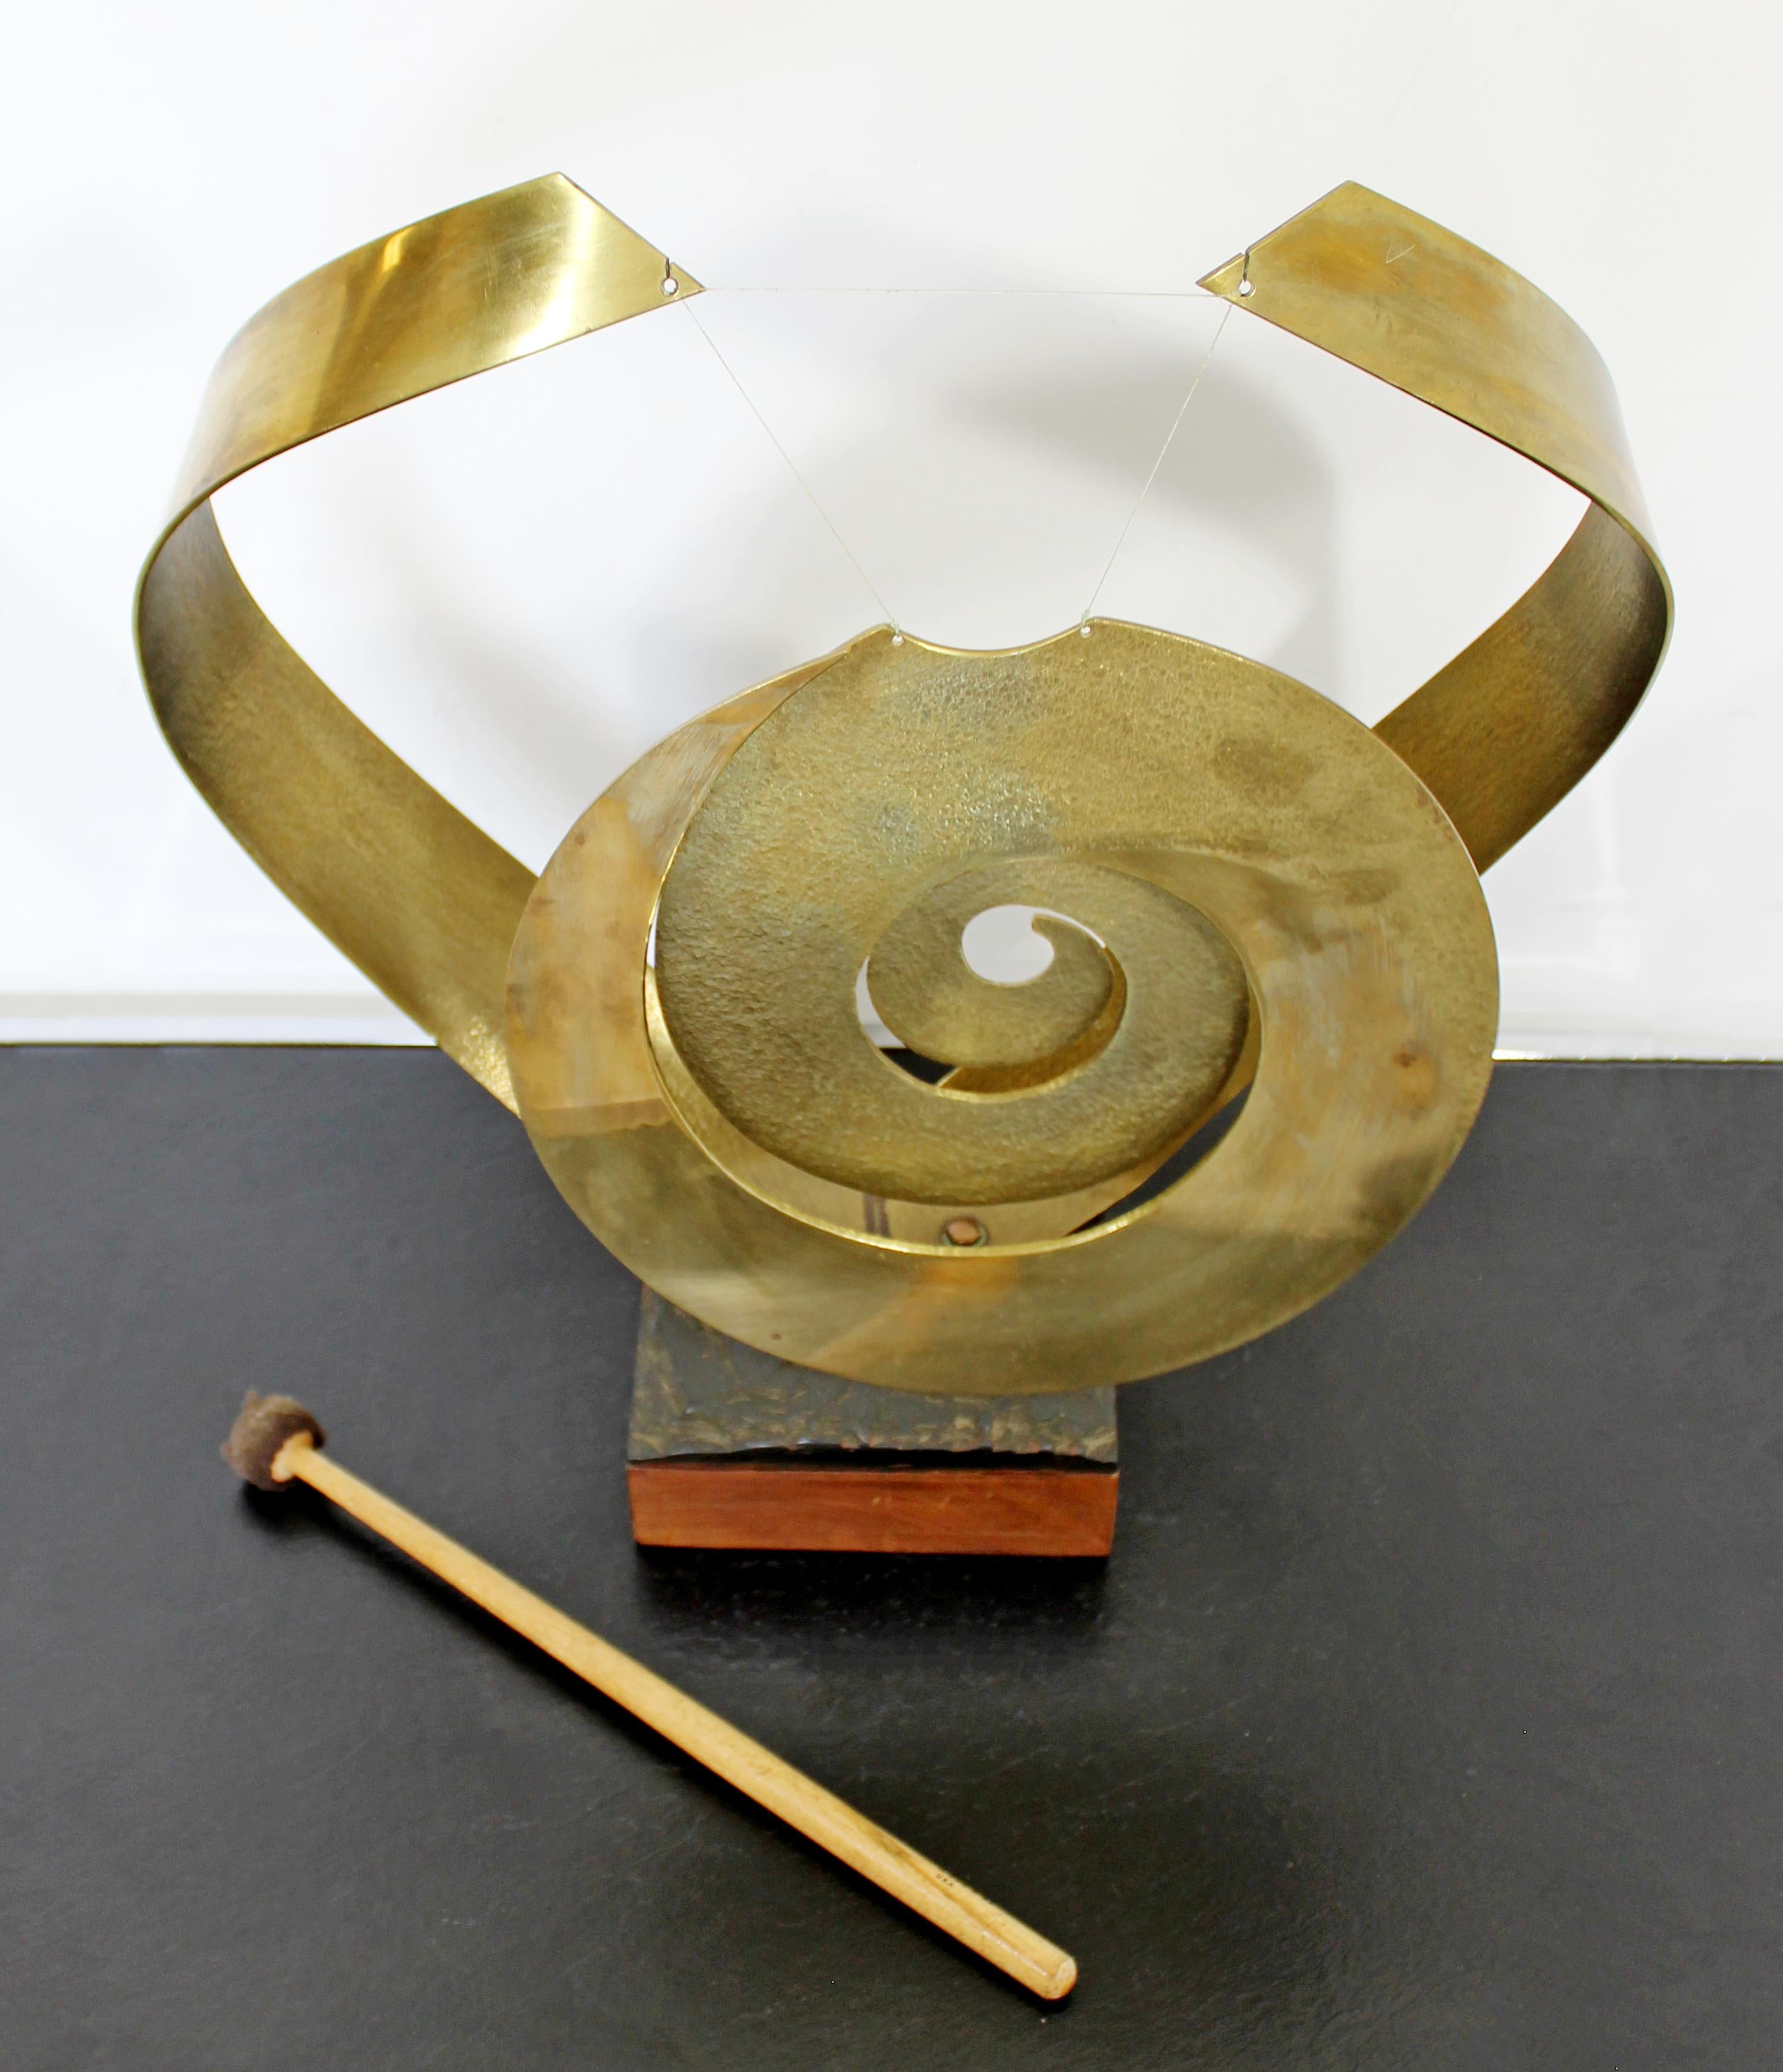 For your consideration is a stupendous, gong table sculpture, made of bronze, titled 